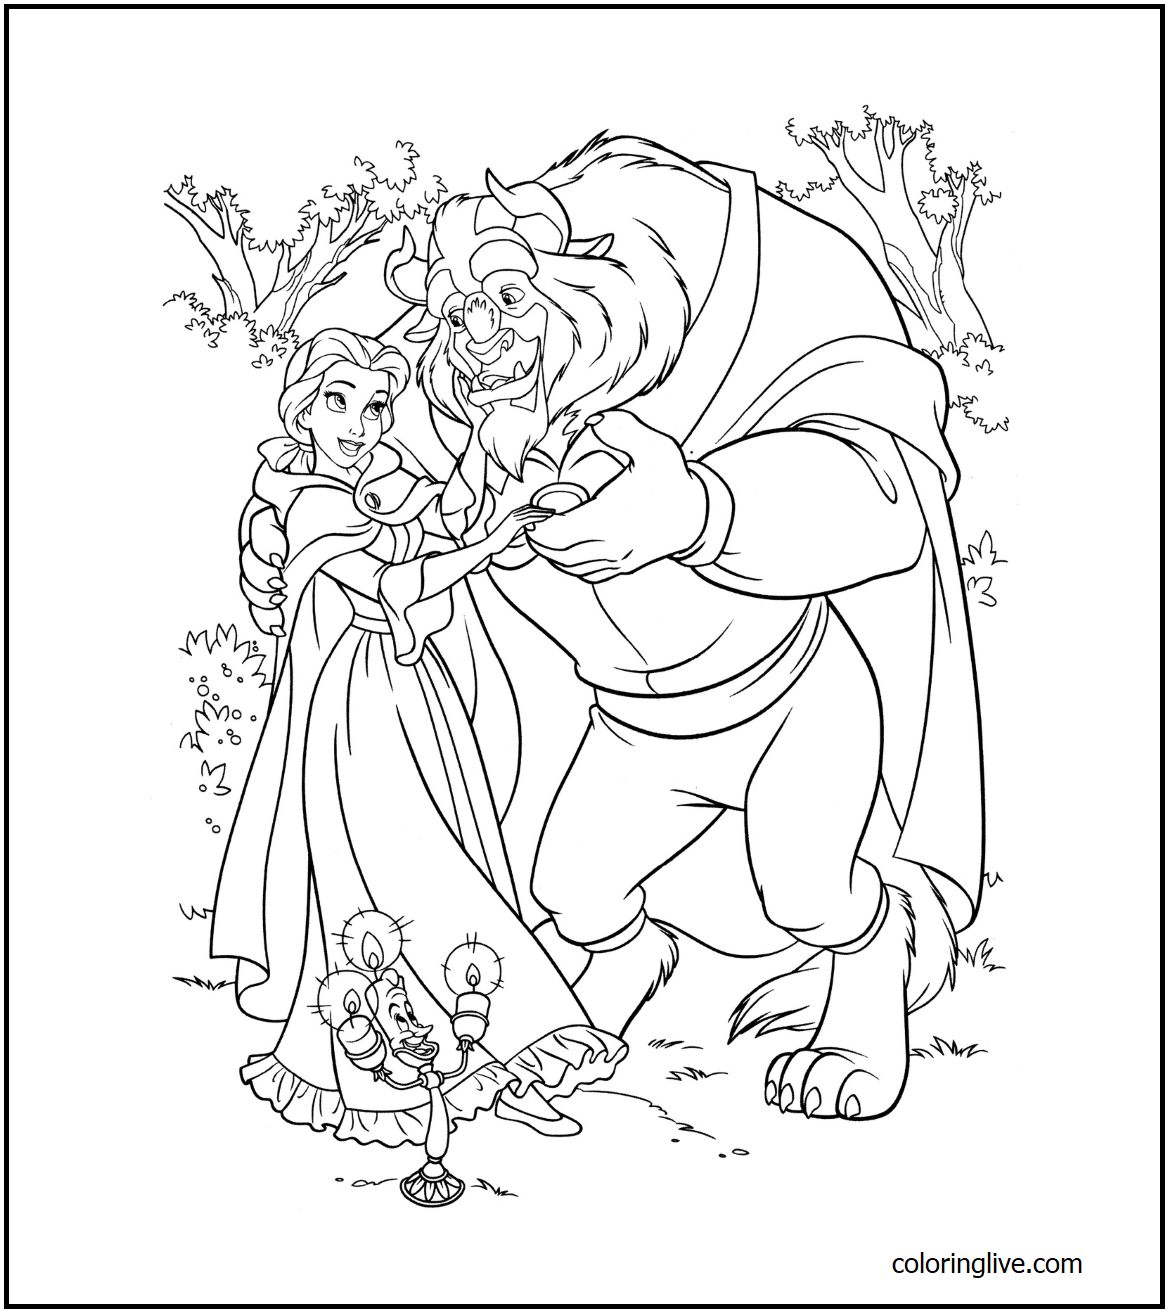 Printable Belle and the Beast Coloring Page for kids.